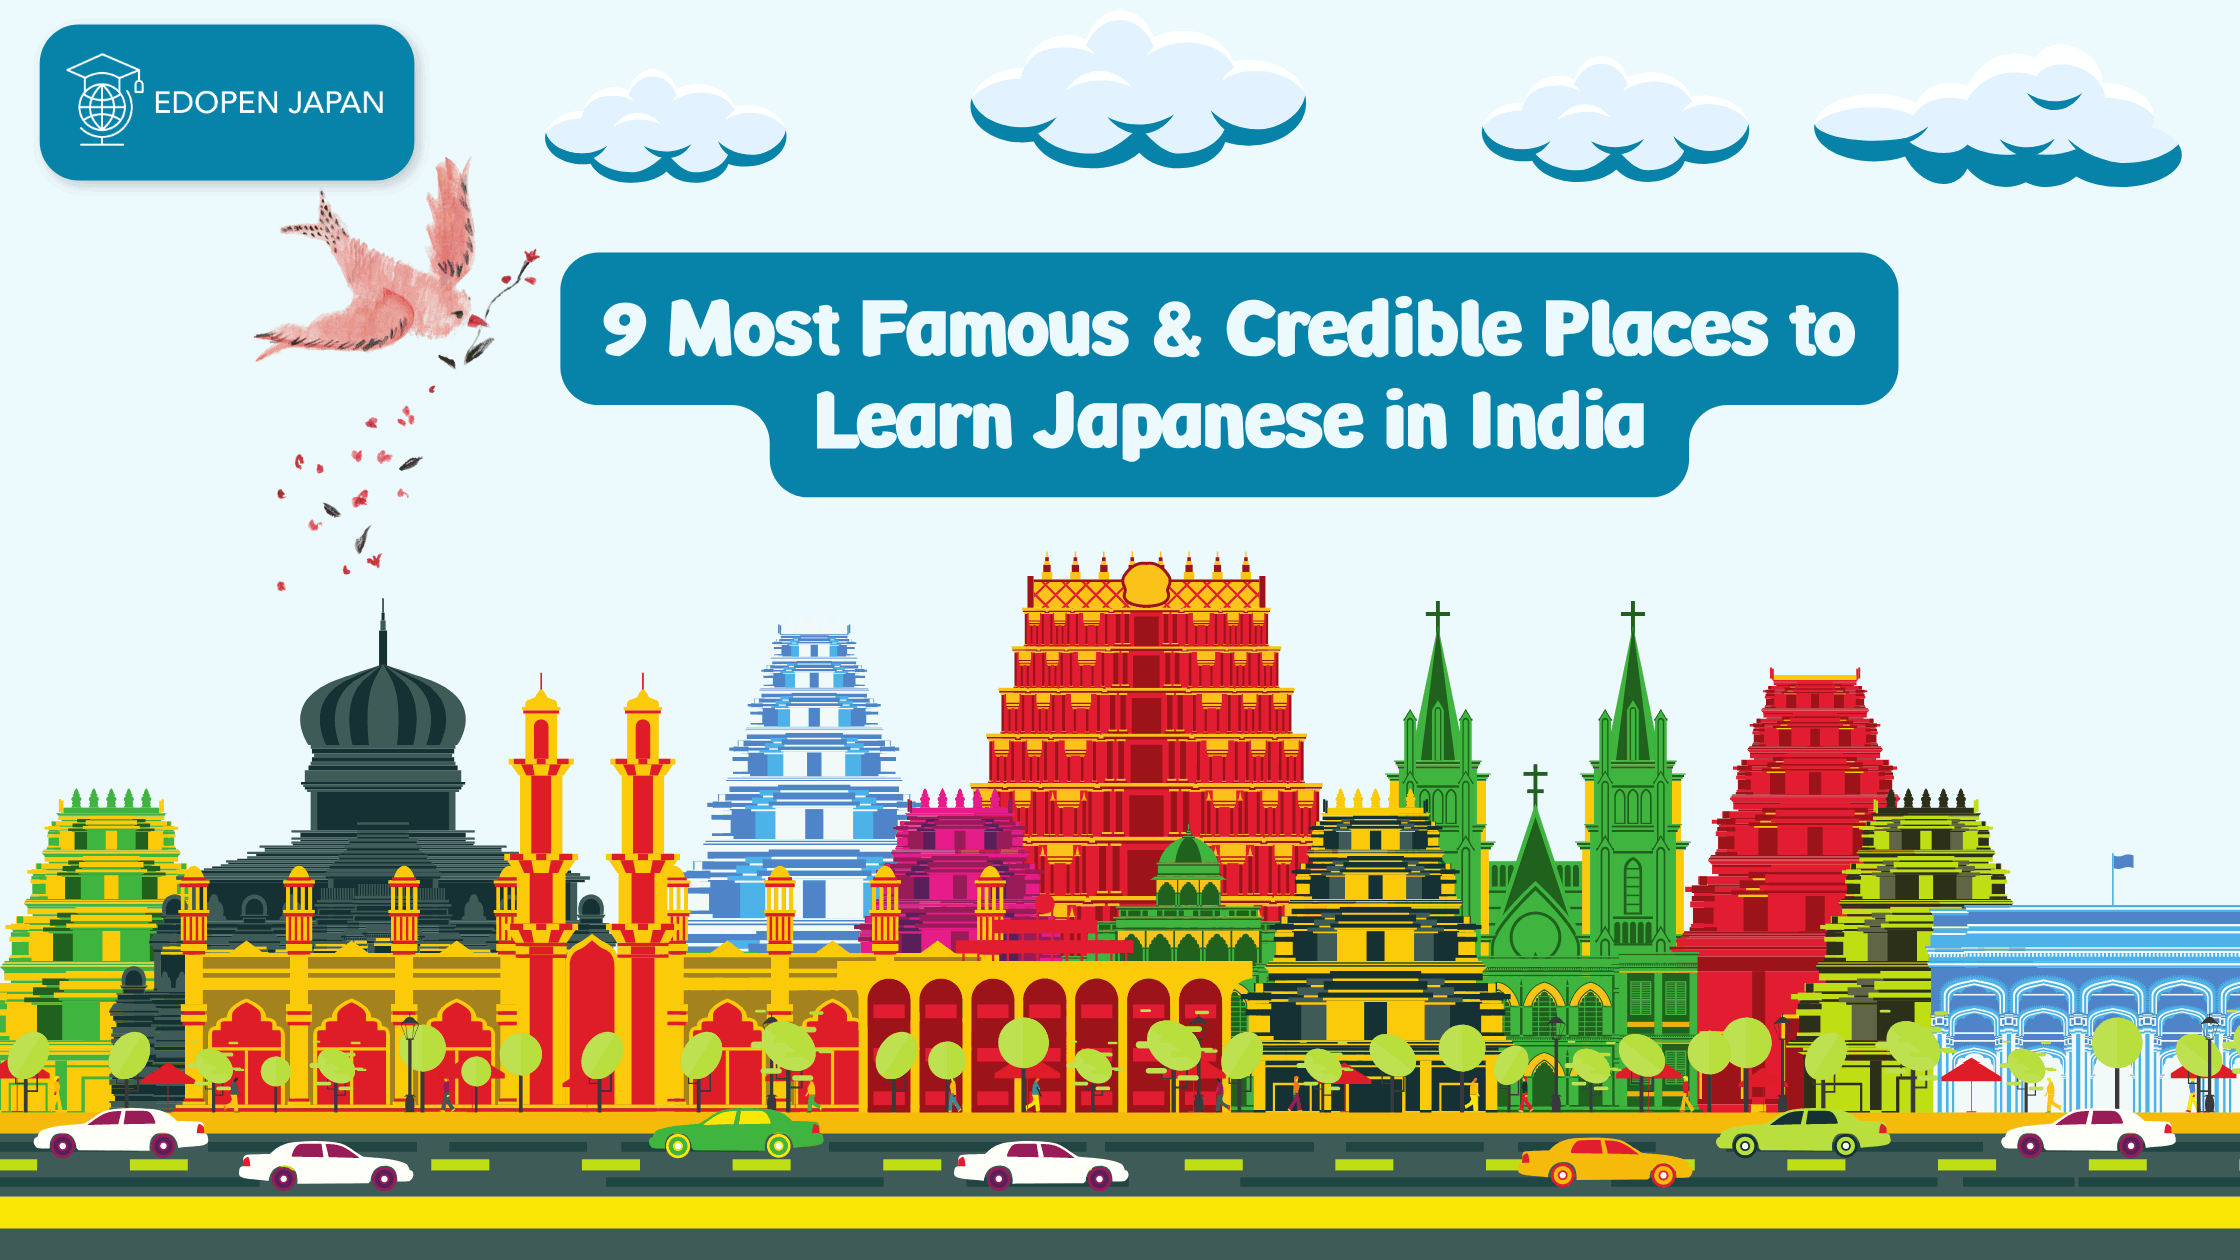 9 Most Famous & Credible Places to Learn Japanese in India - EDOPEN Japan